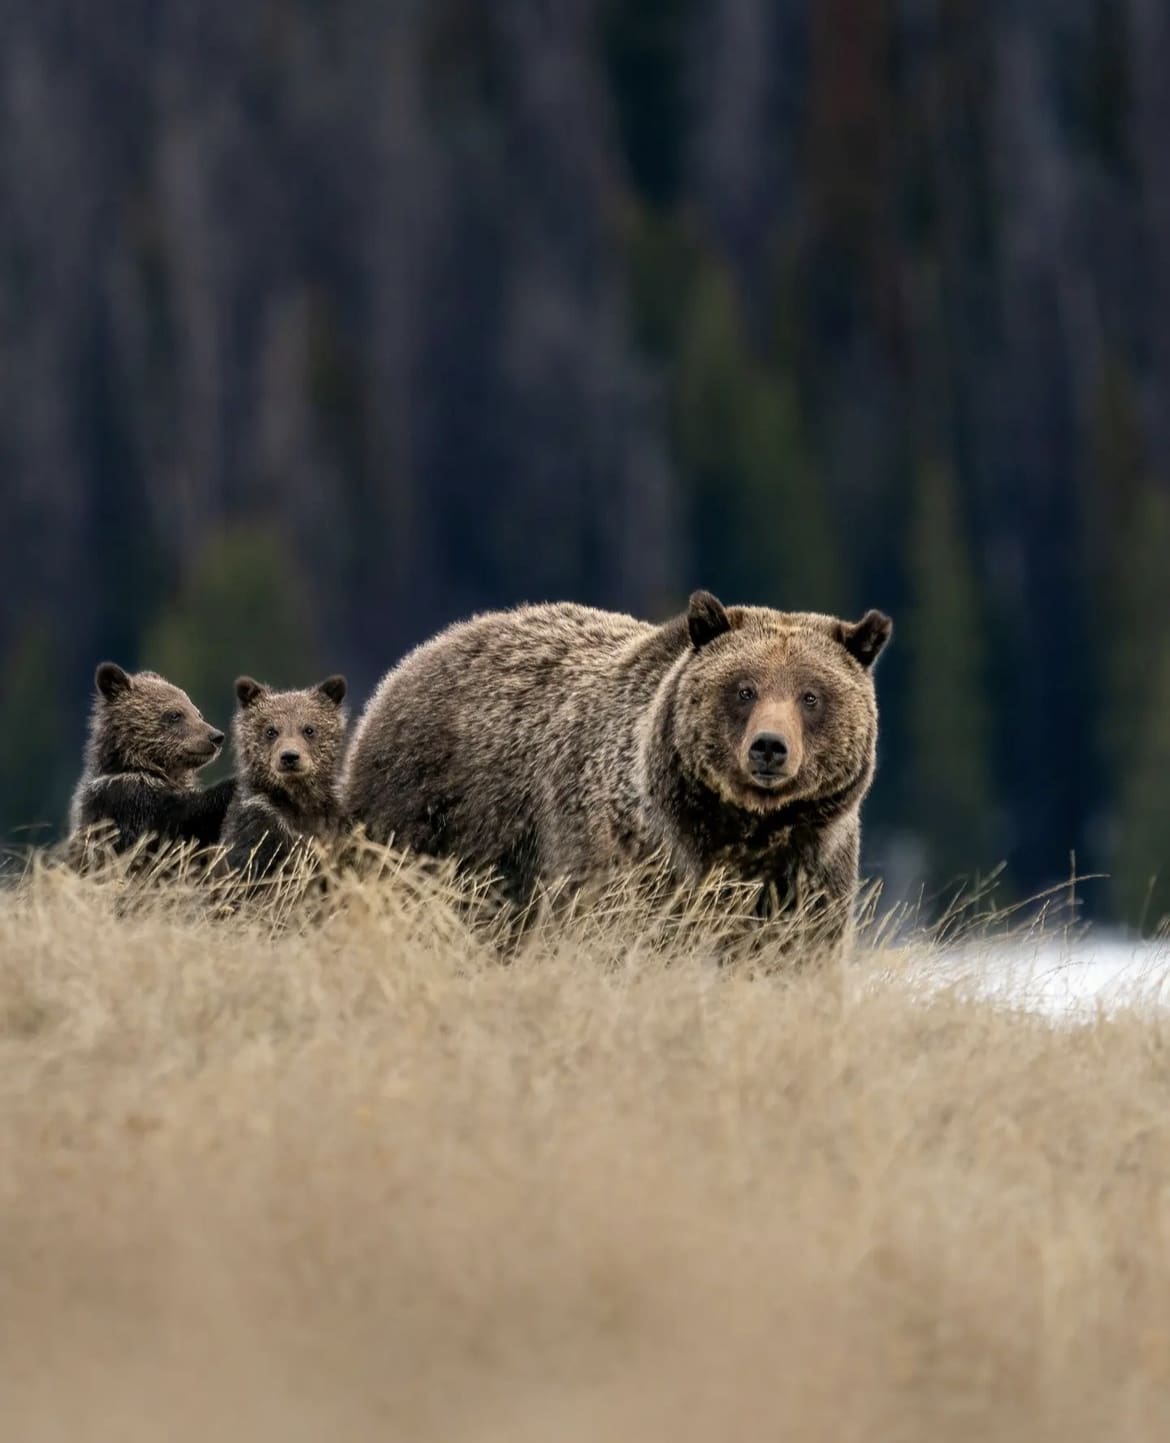 Mother bear with two young cubs